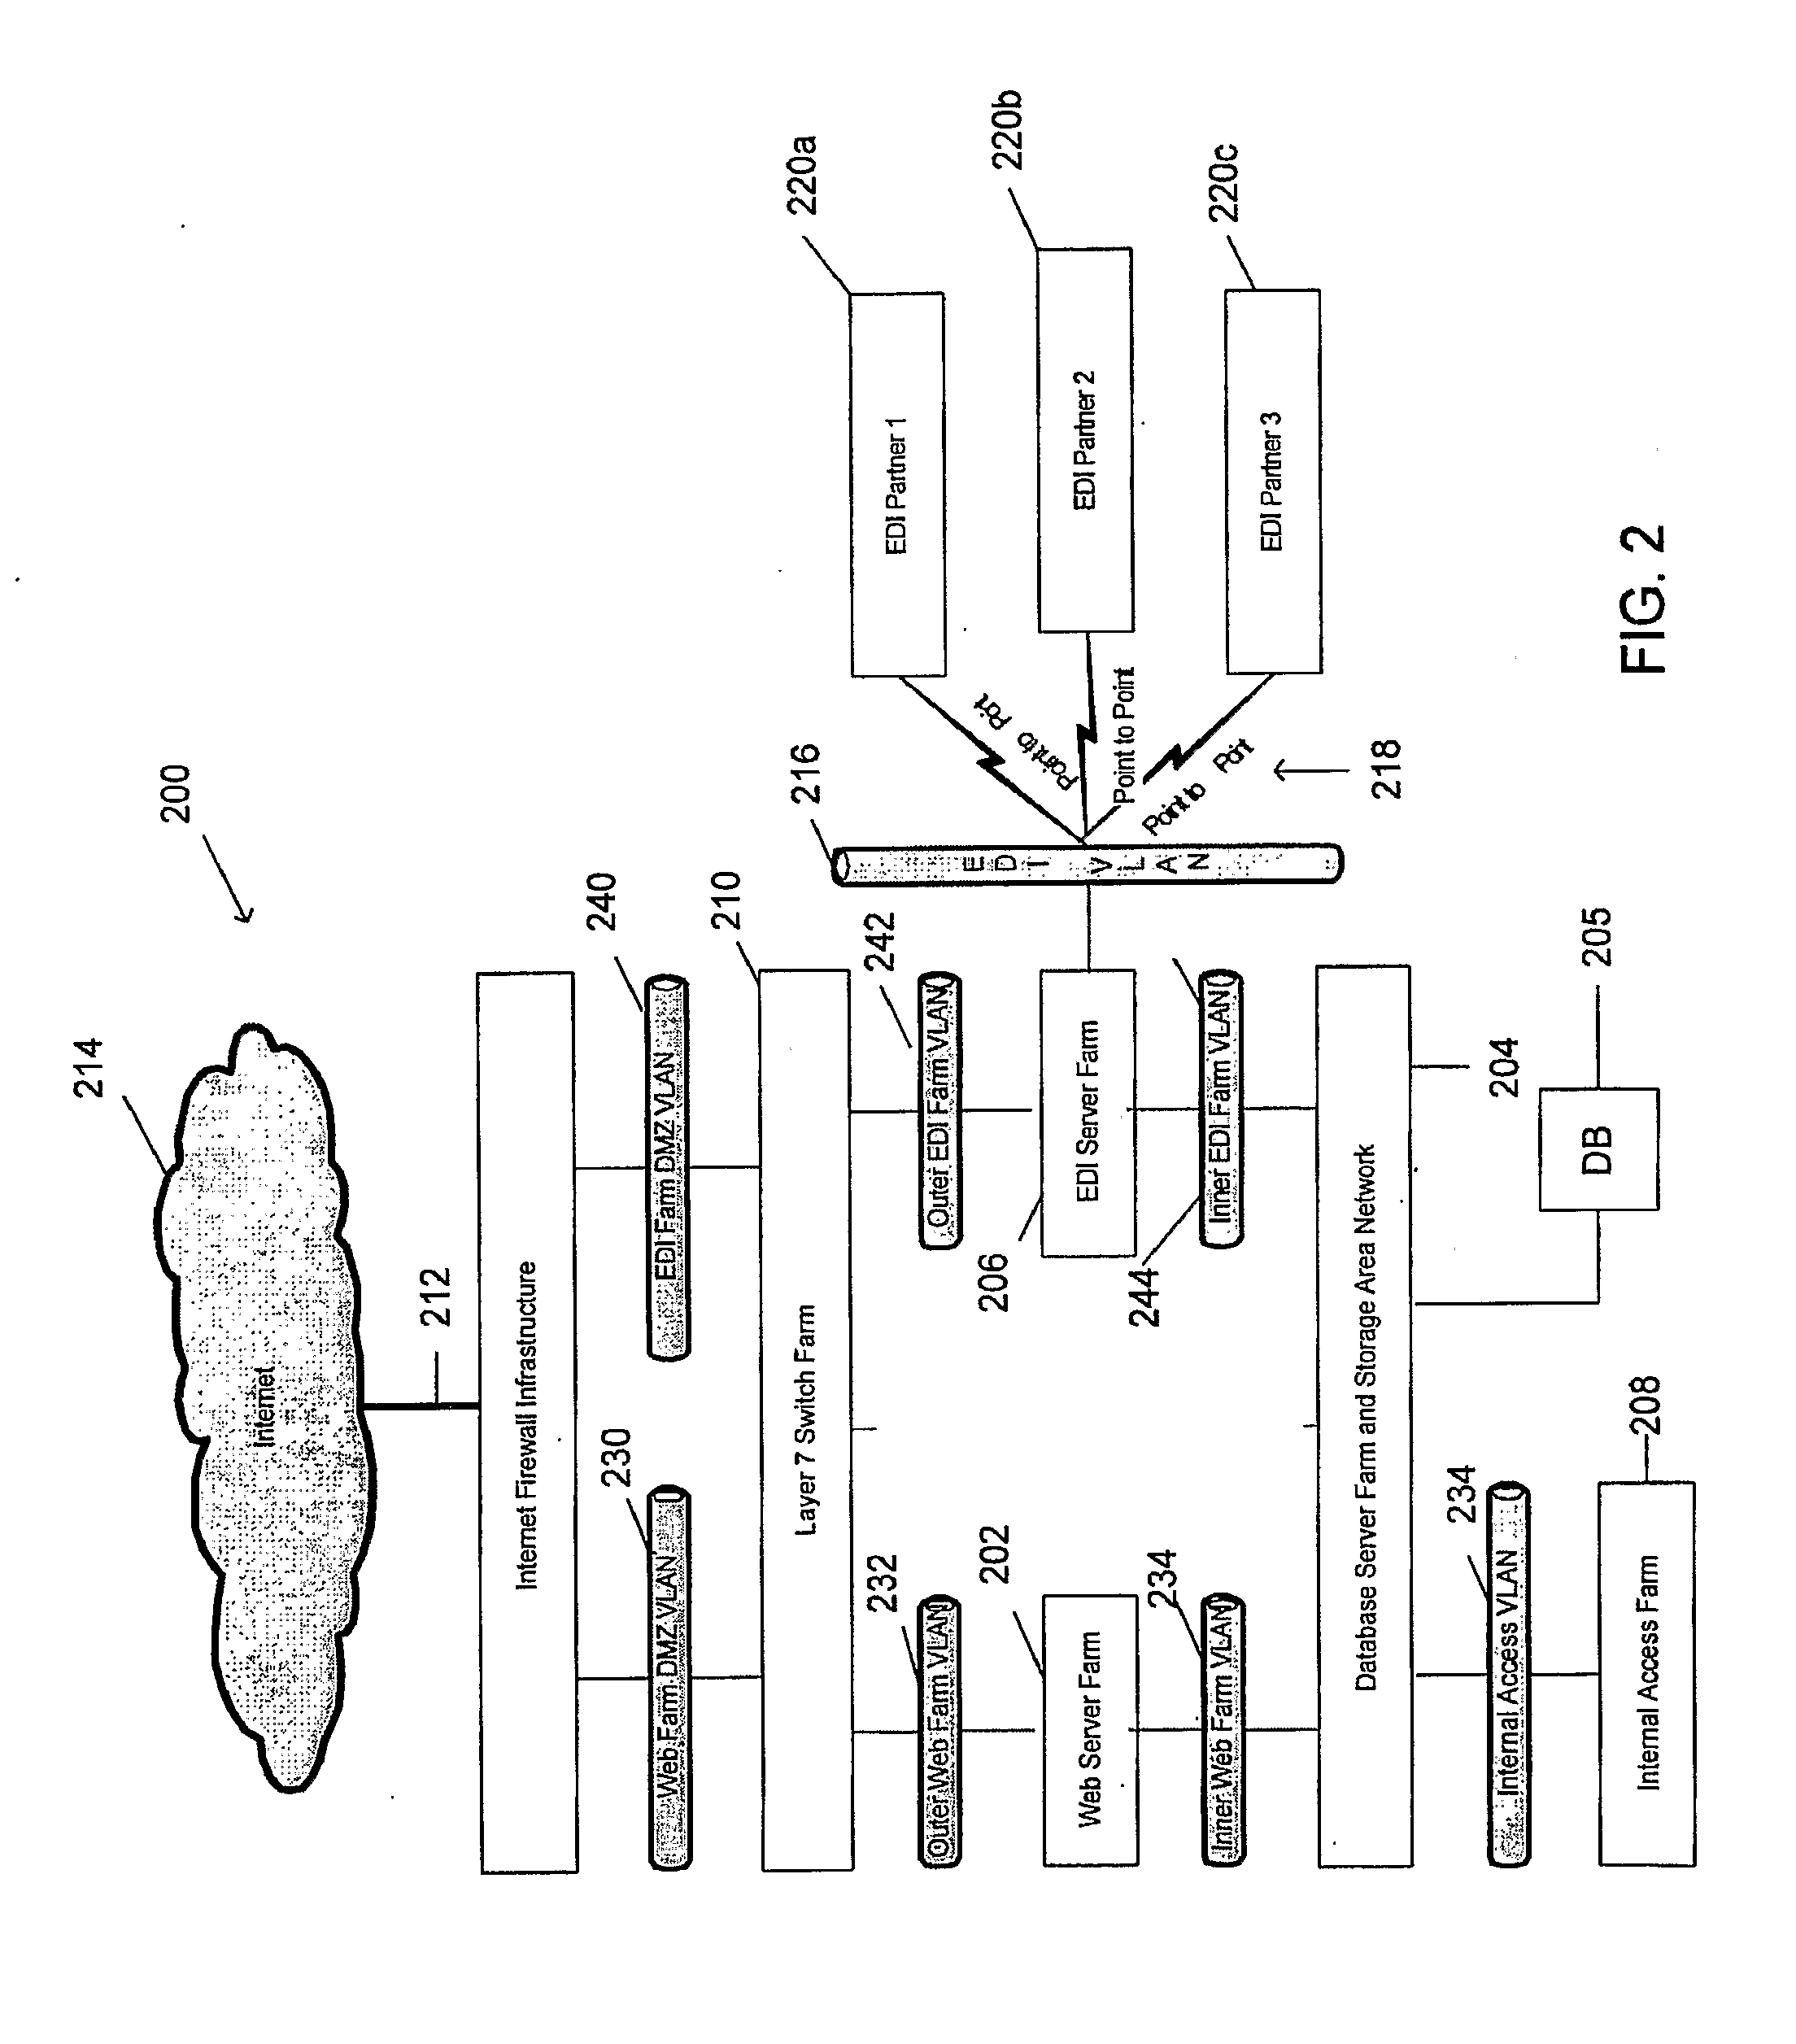 System and method for targeted marketing and consumer resource management